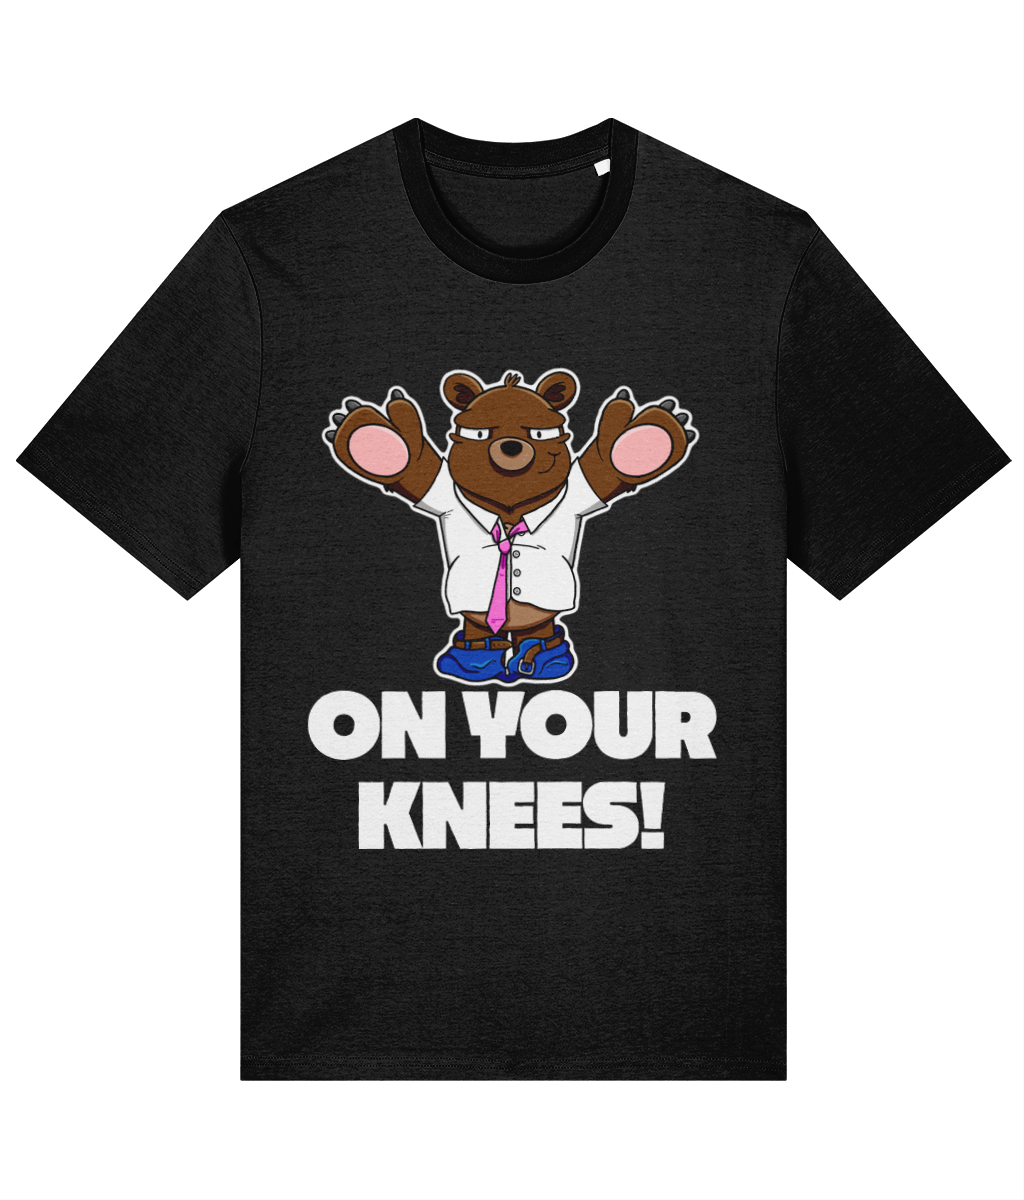 On your Knees! T-Shirt